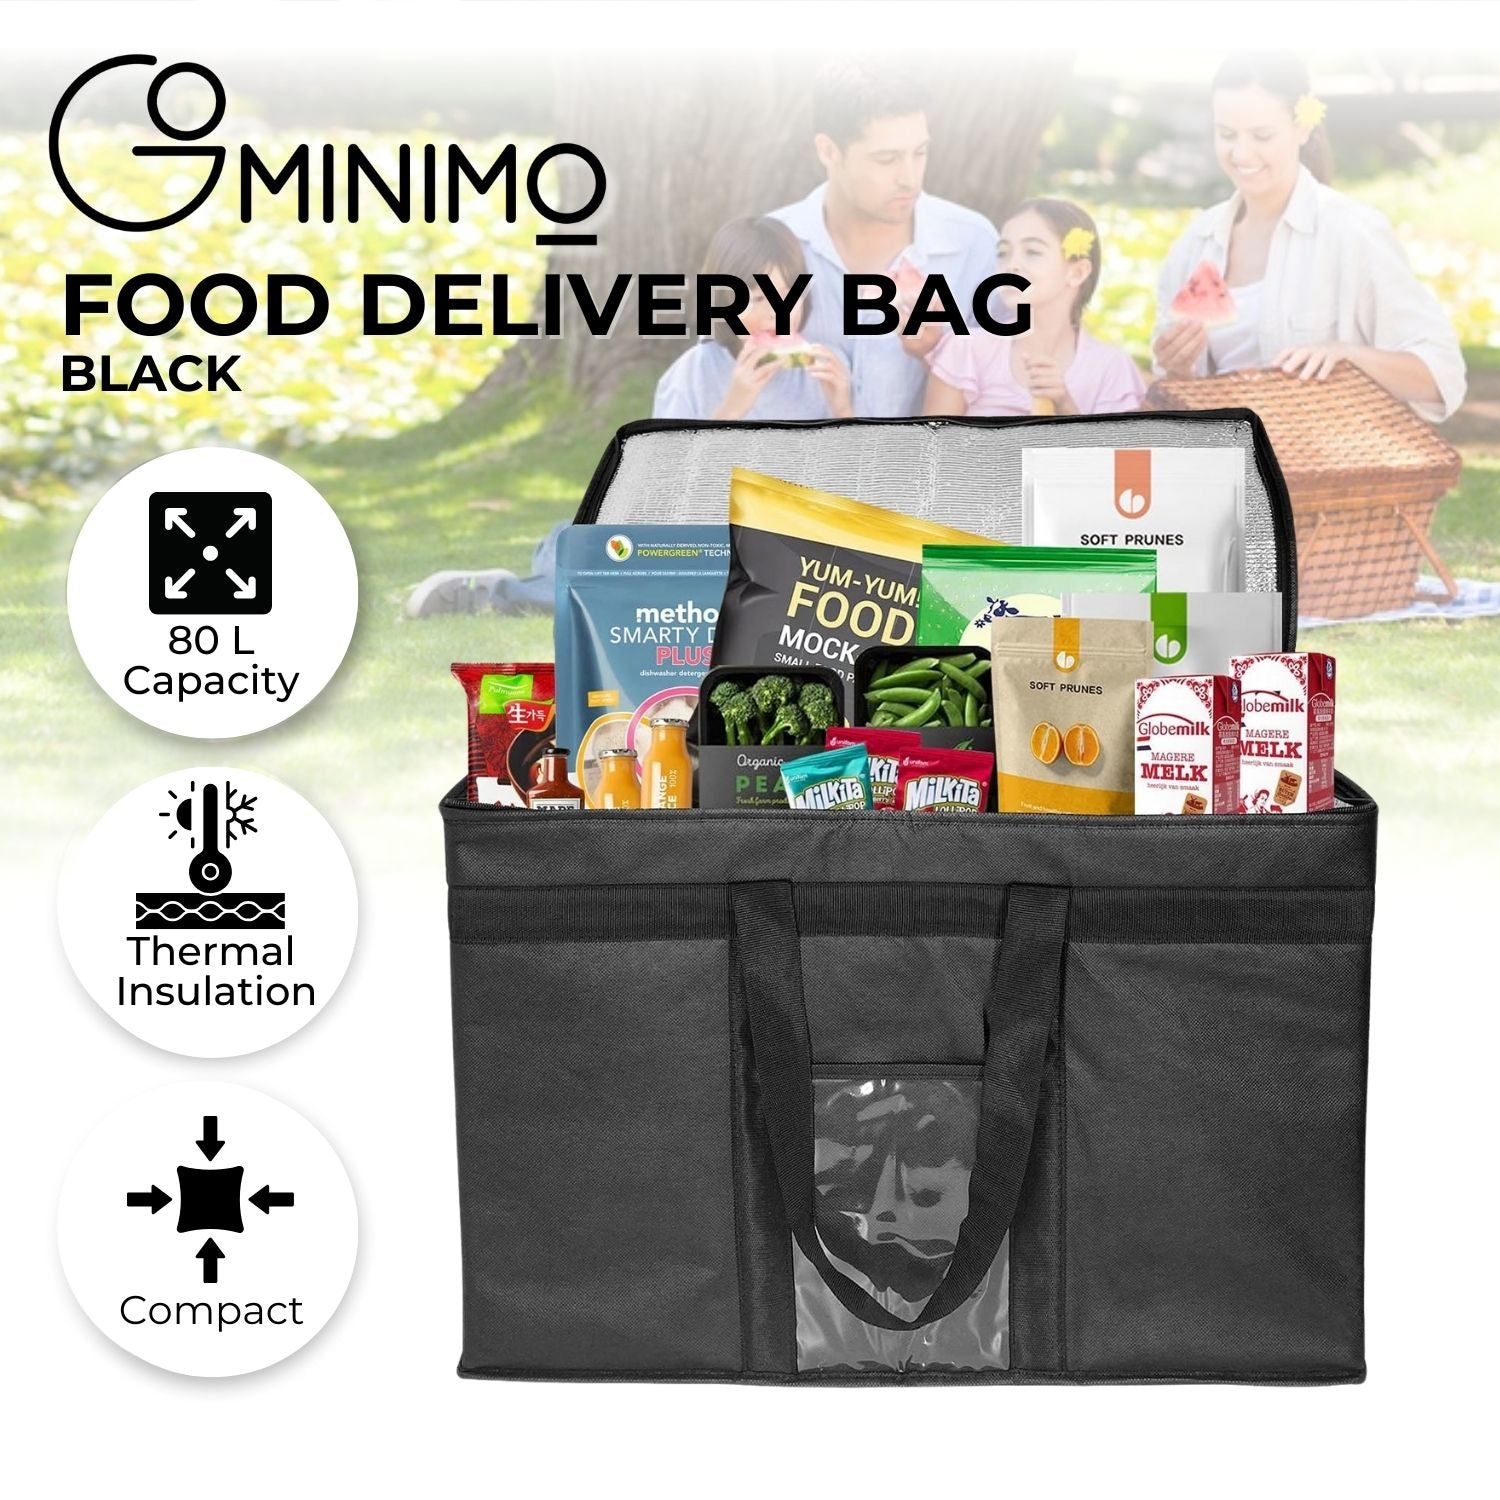 GOMINIMO 80L Large Insulated Food Delivery Bag with Zipper Closure (Black) GO-FDB-102-KLAD